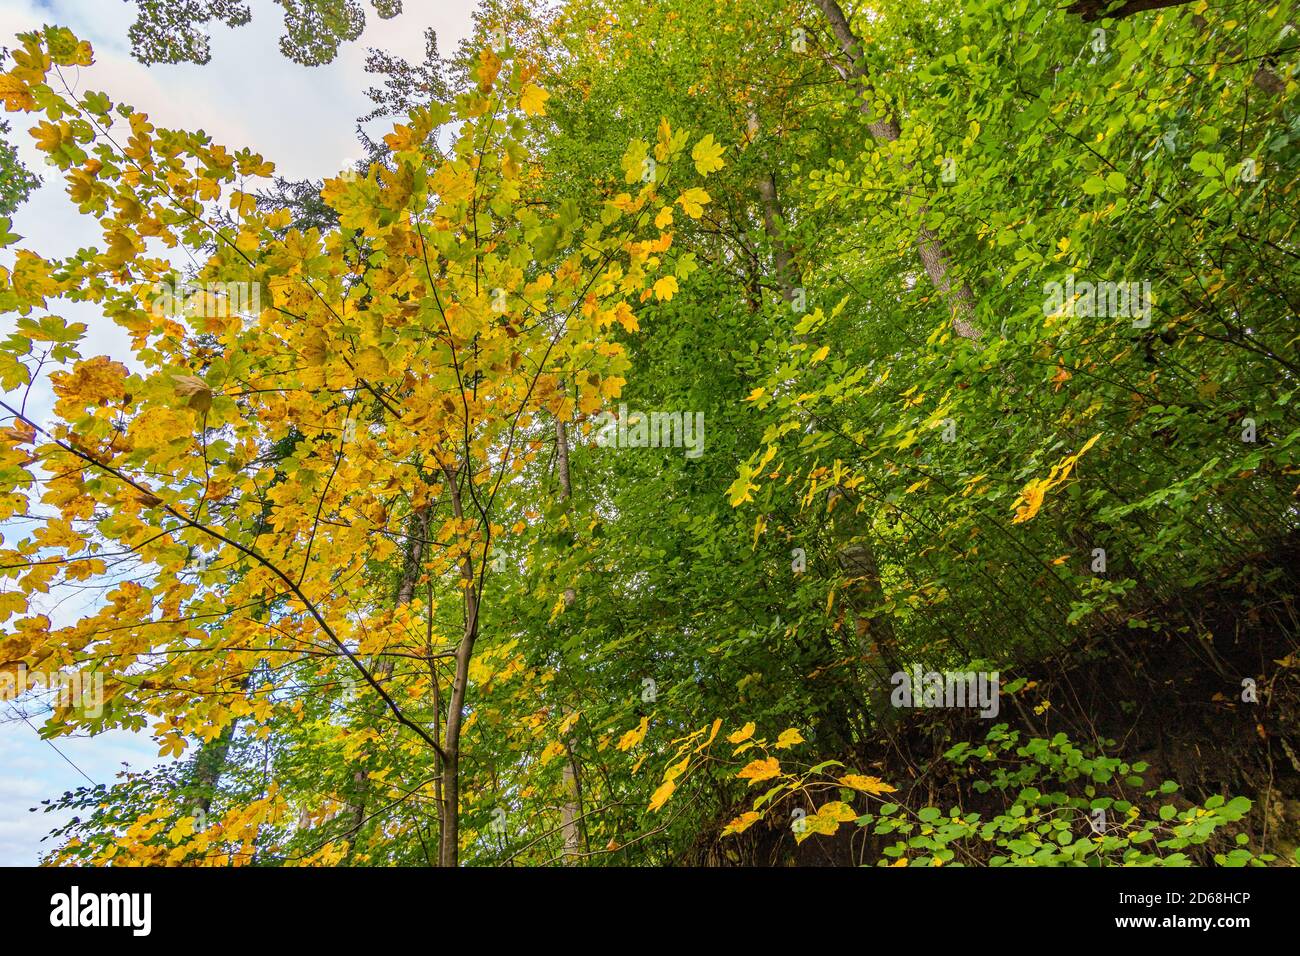 beautiful autumn hike in the colorful forest near wilhelmsdorf near ravensburg in upper swabia germany Stock Photo